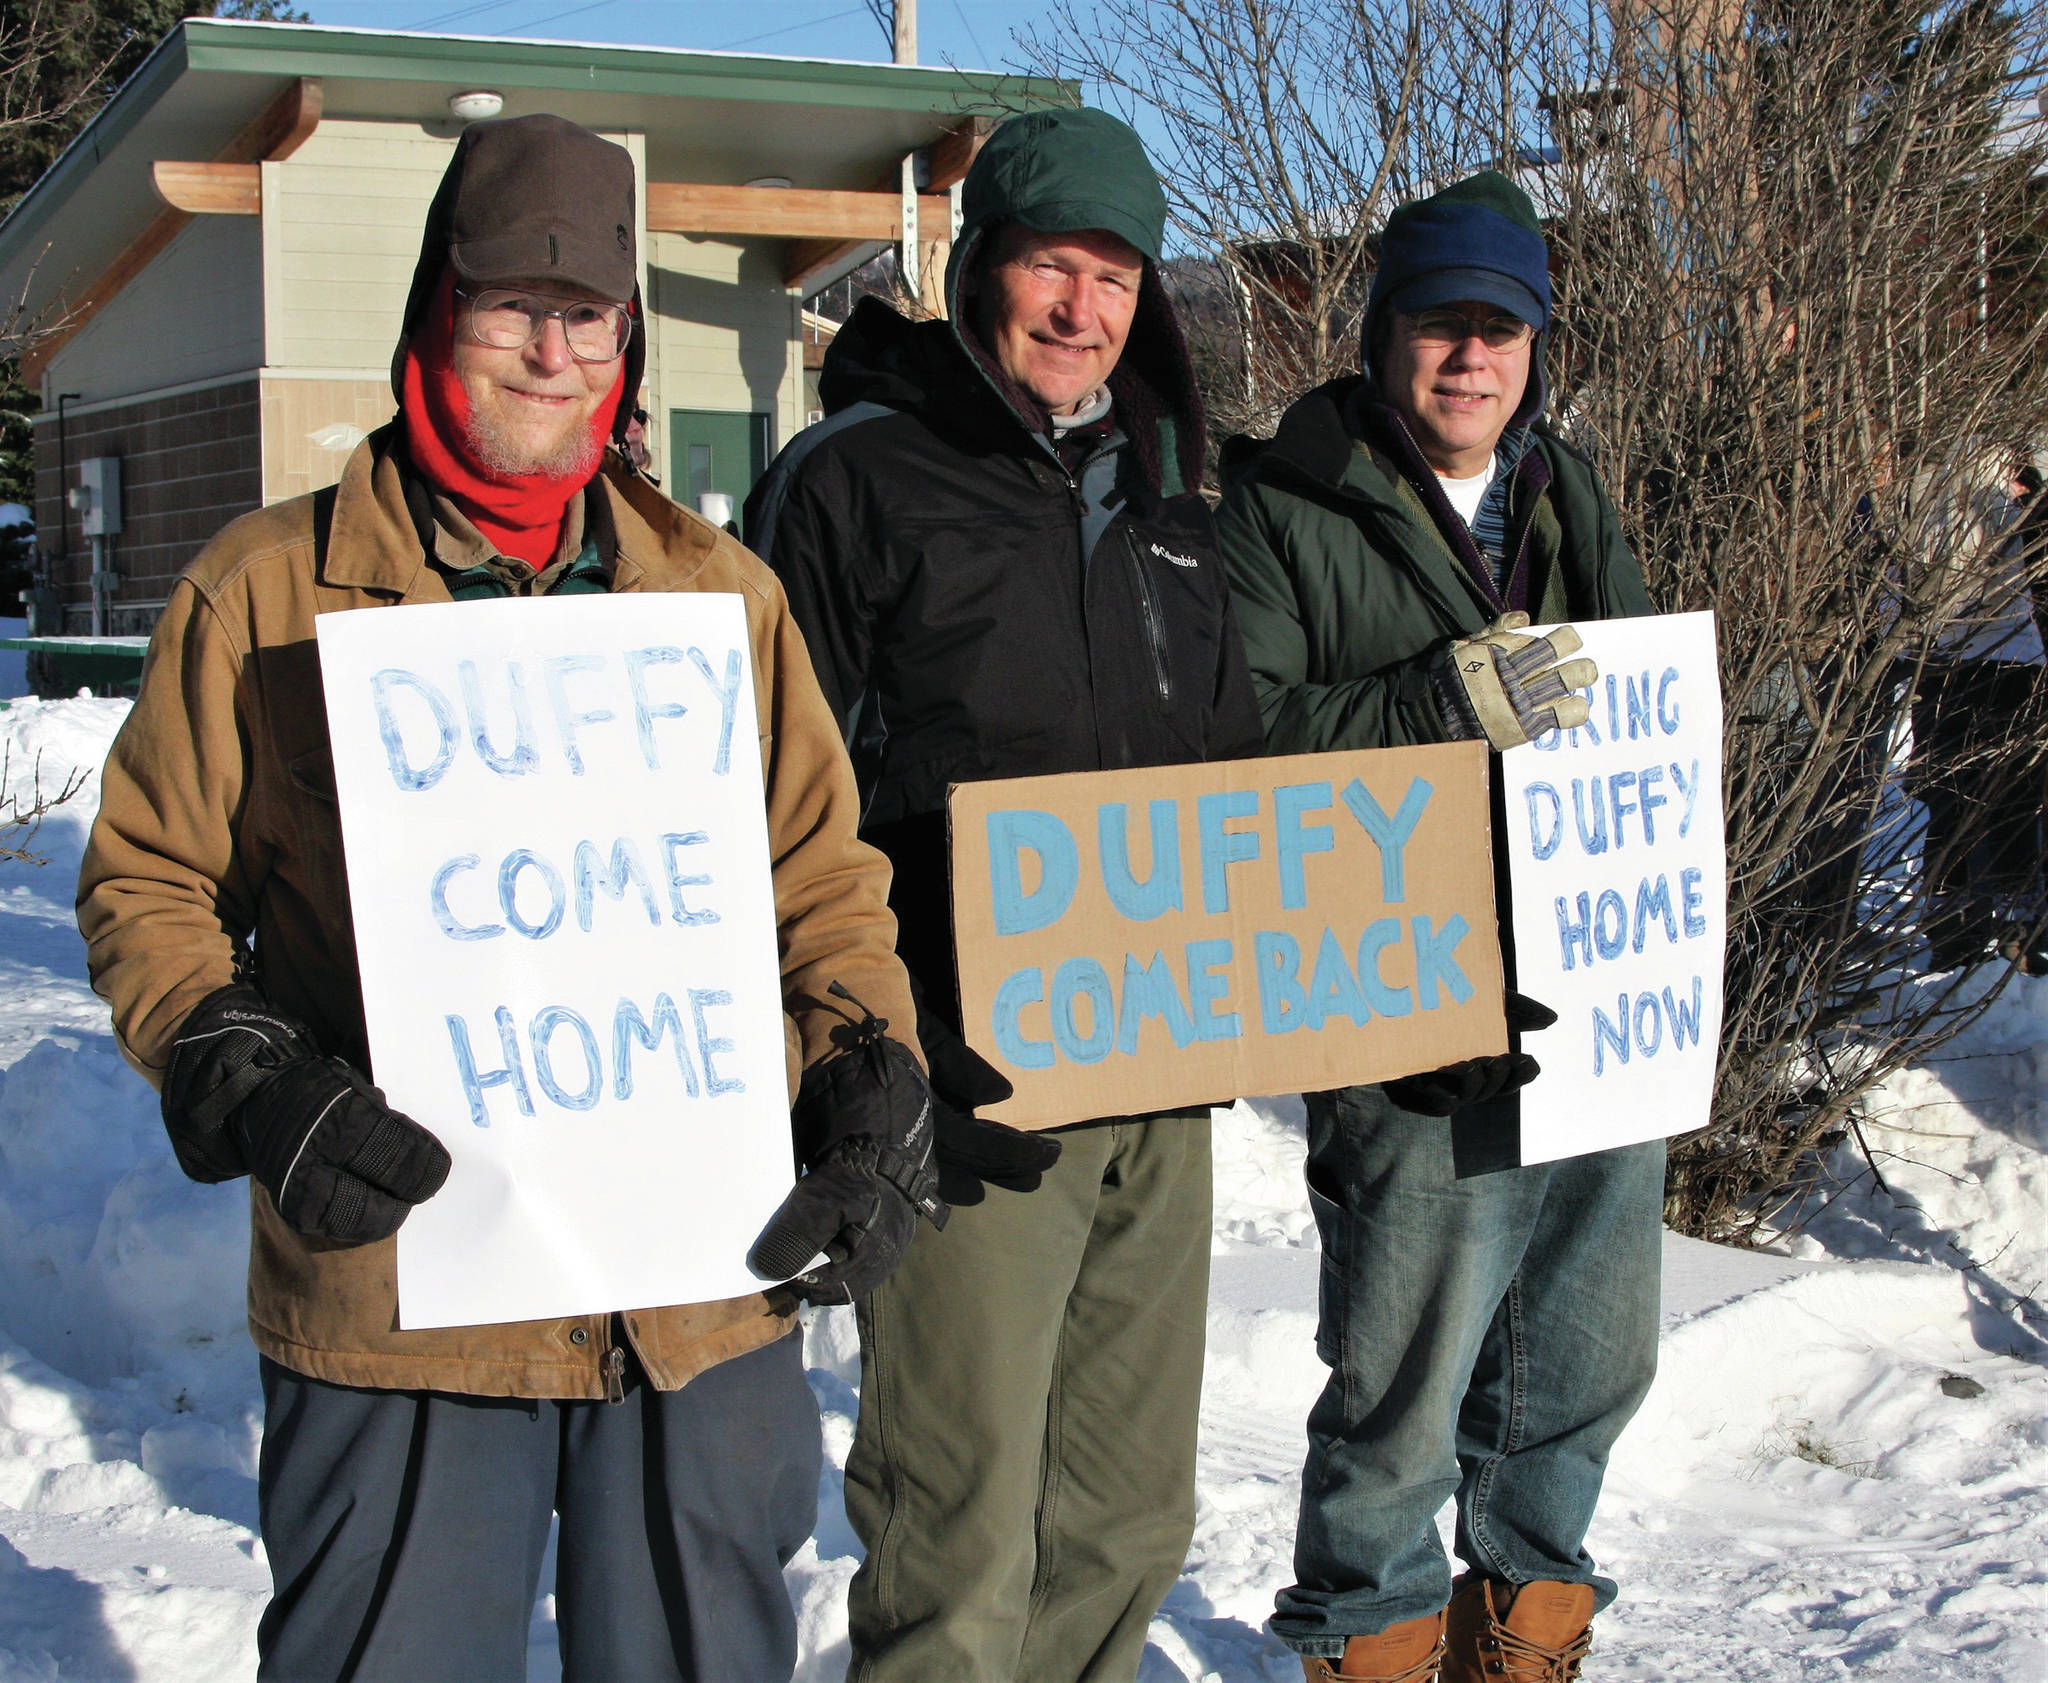 From left to right, Homer residents Tony Burgess, Neil Wagner and Charlie Trowbridge stand vigil for Anesha “Duffy” Murnane at WKFL Park on Saturday, Feb. 1, 2020, in Homer, Alaska. (Photo by Delcenia Cosman)                                From left to right, Homer residents Tony Burgess, Neil Wagner and Charlie Trowbridge stand vigil for Anesha “Duffy” Murnane at WKFL Park on Saturday, Feb. 1, 2020, in Homer, Alaska. (Photo by Delcenia Cosman)